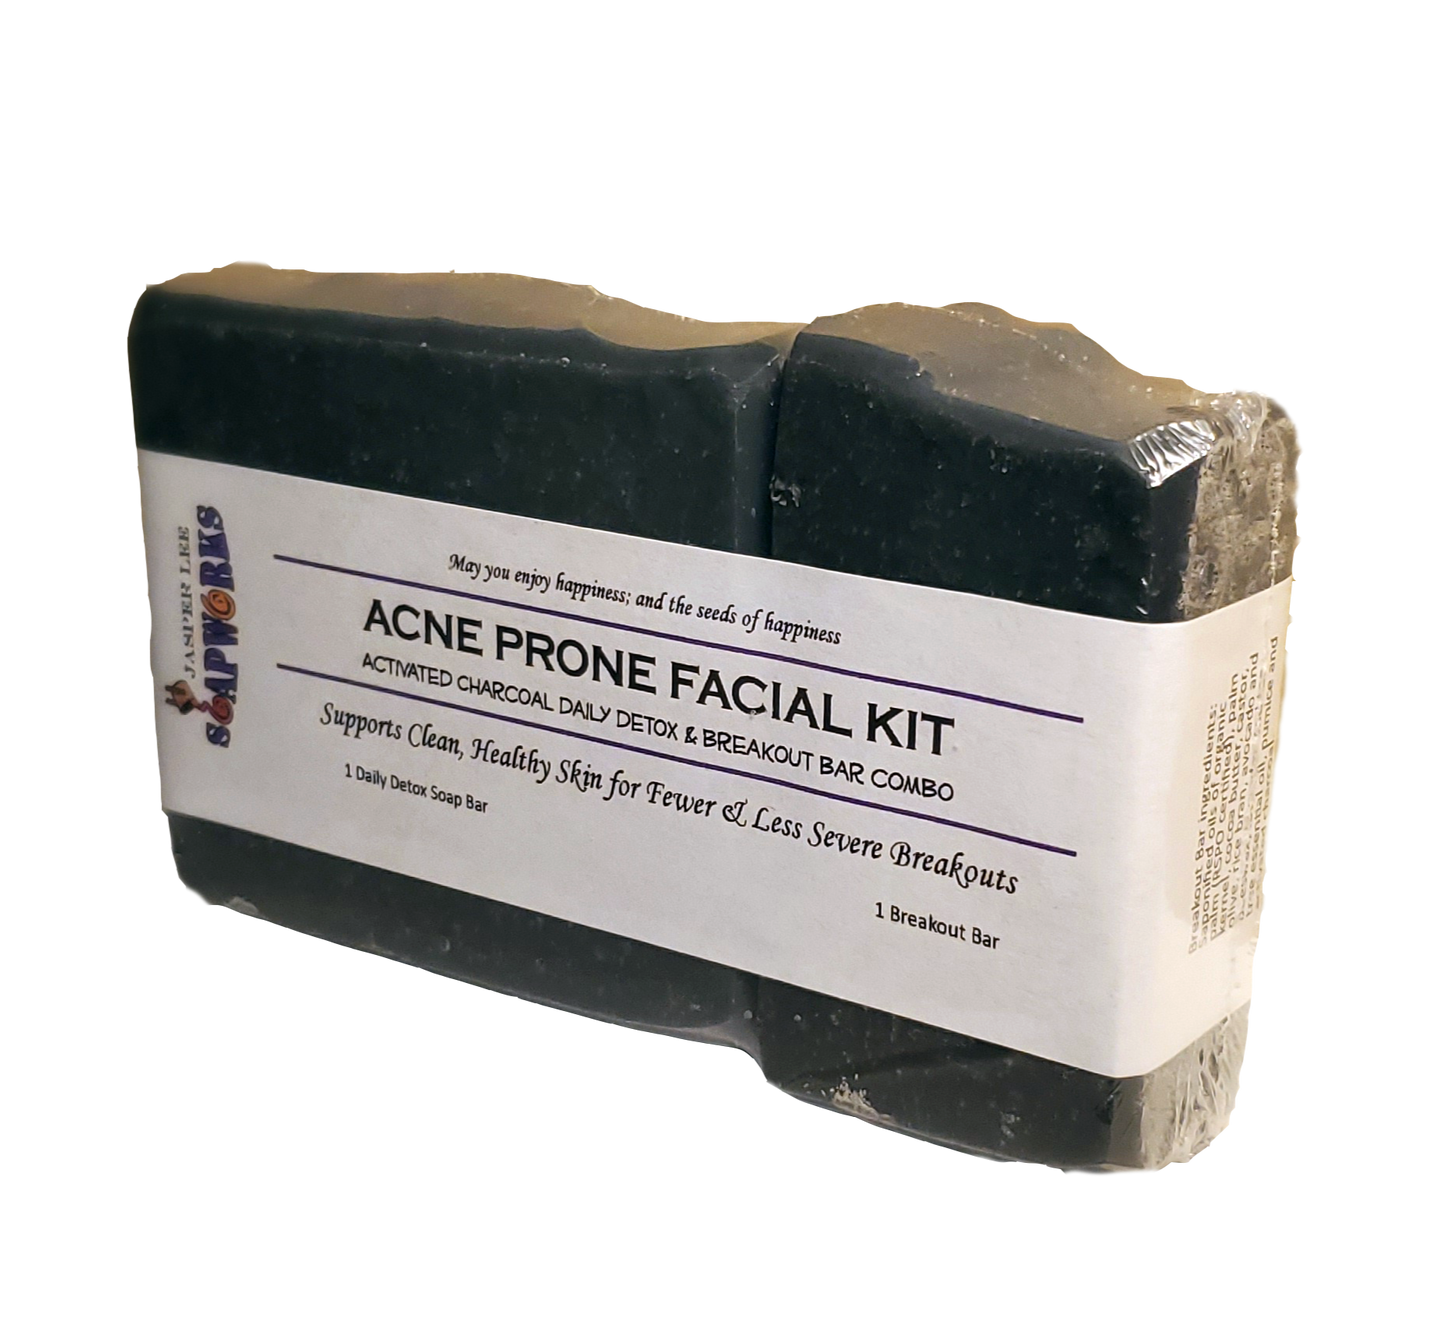 Acne prone Facial Kit includes 1 activated charcoal Daily Detox bar & 1 Breakout Bar. Supports clean healthy skin for fewer & less severe breakouts